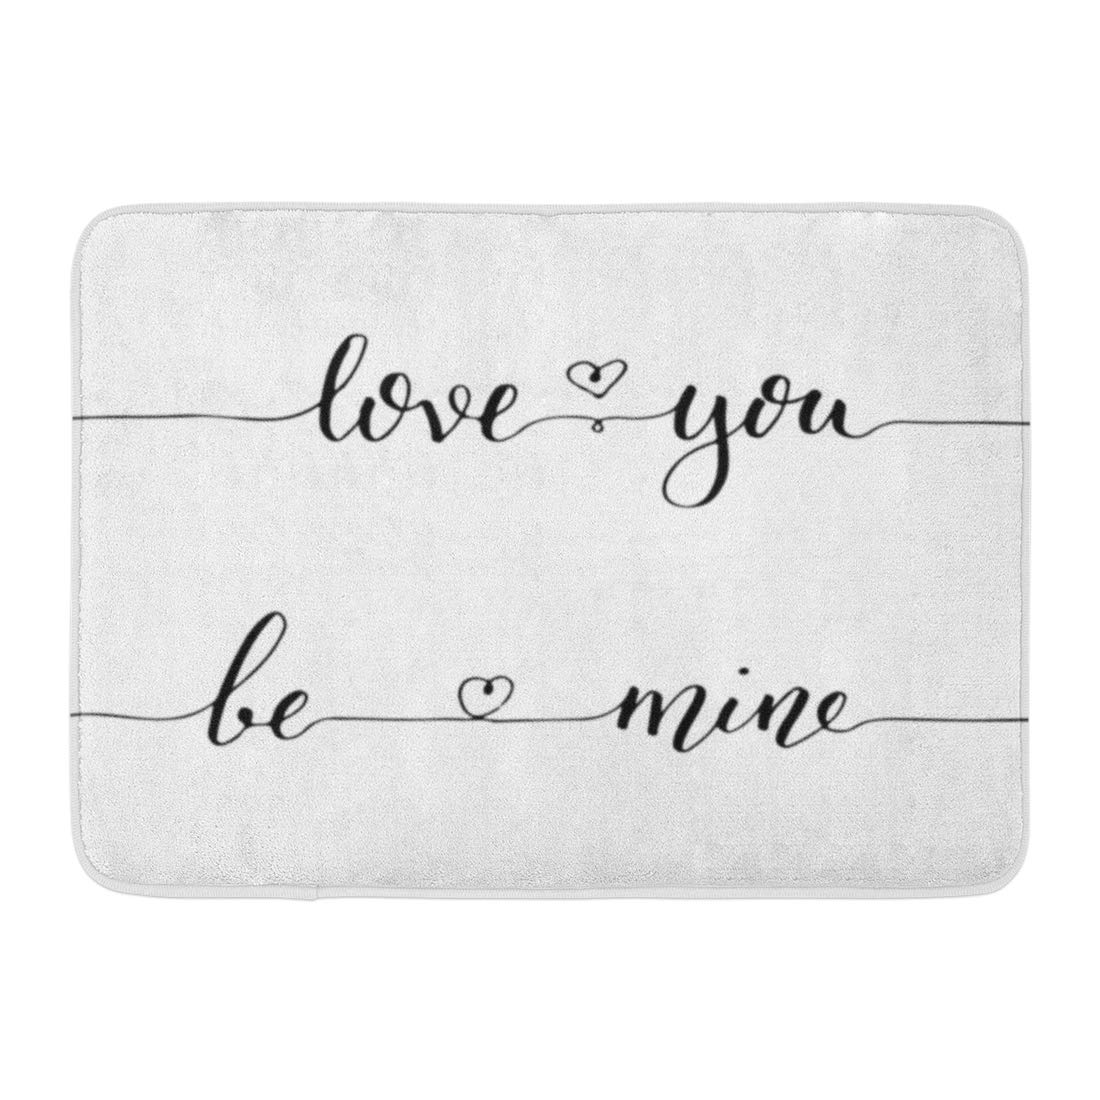 GODPOK Calligraphy Hand Lettering Love You and Be Mine Words Black Ink White Valentine's Day Design Write Rug Doormat Bath Mat 23.6x15.7 inch - image 1 of 1